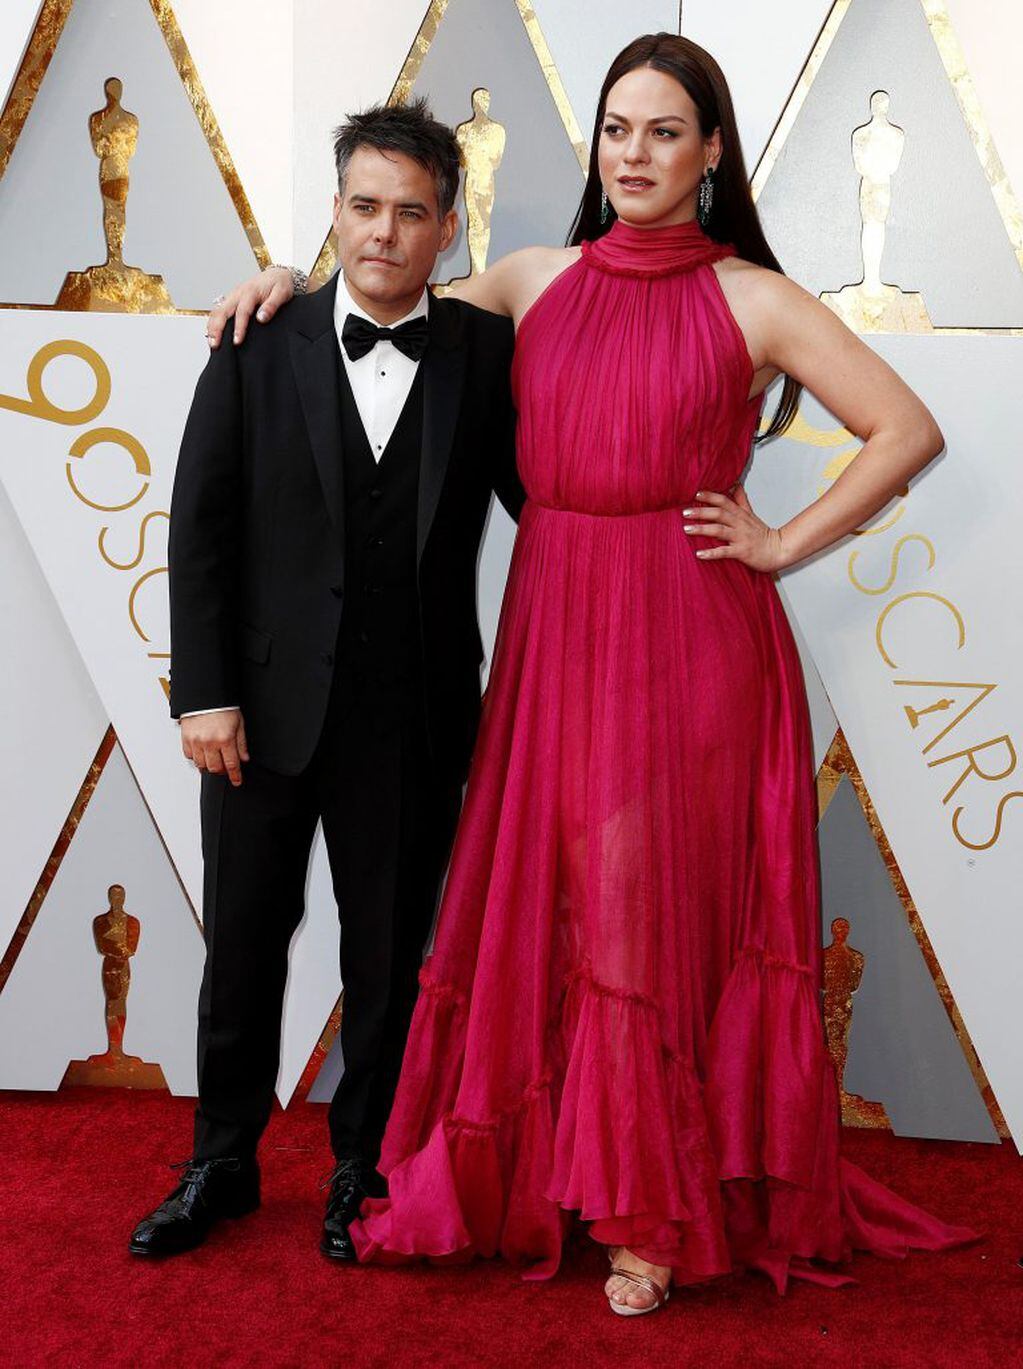 MCX123. Hollywood (United States), 04/03/2018.- Sebastian Lelio (L) and Daniela Vega arrive for the 90th annual Academy Awards ceremony at the Dolby Theatre in Hollywood, California, USA, 04 March 2018. The Oscars are presented for outstanding individual or collective efforts in 24 categories in filmmaking. (Estados Unidos) EFE/EPA/MIKE NELSON